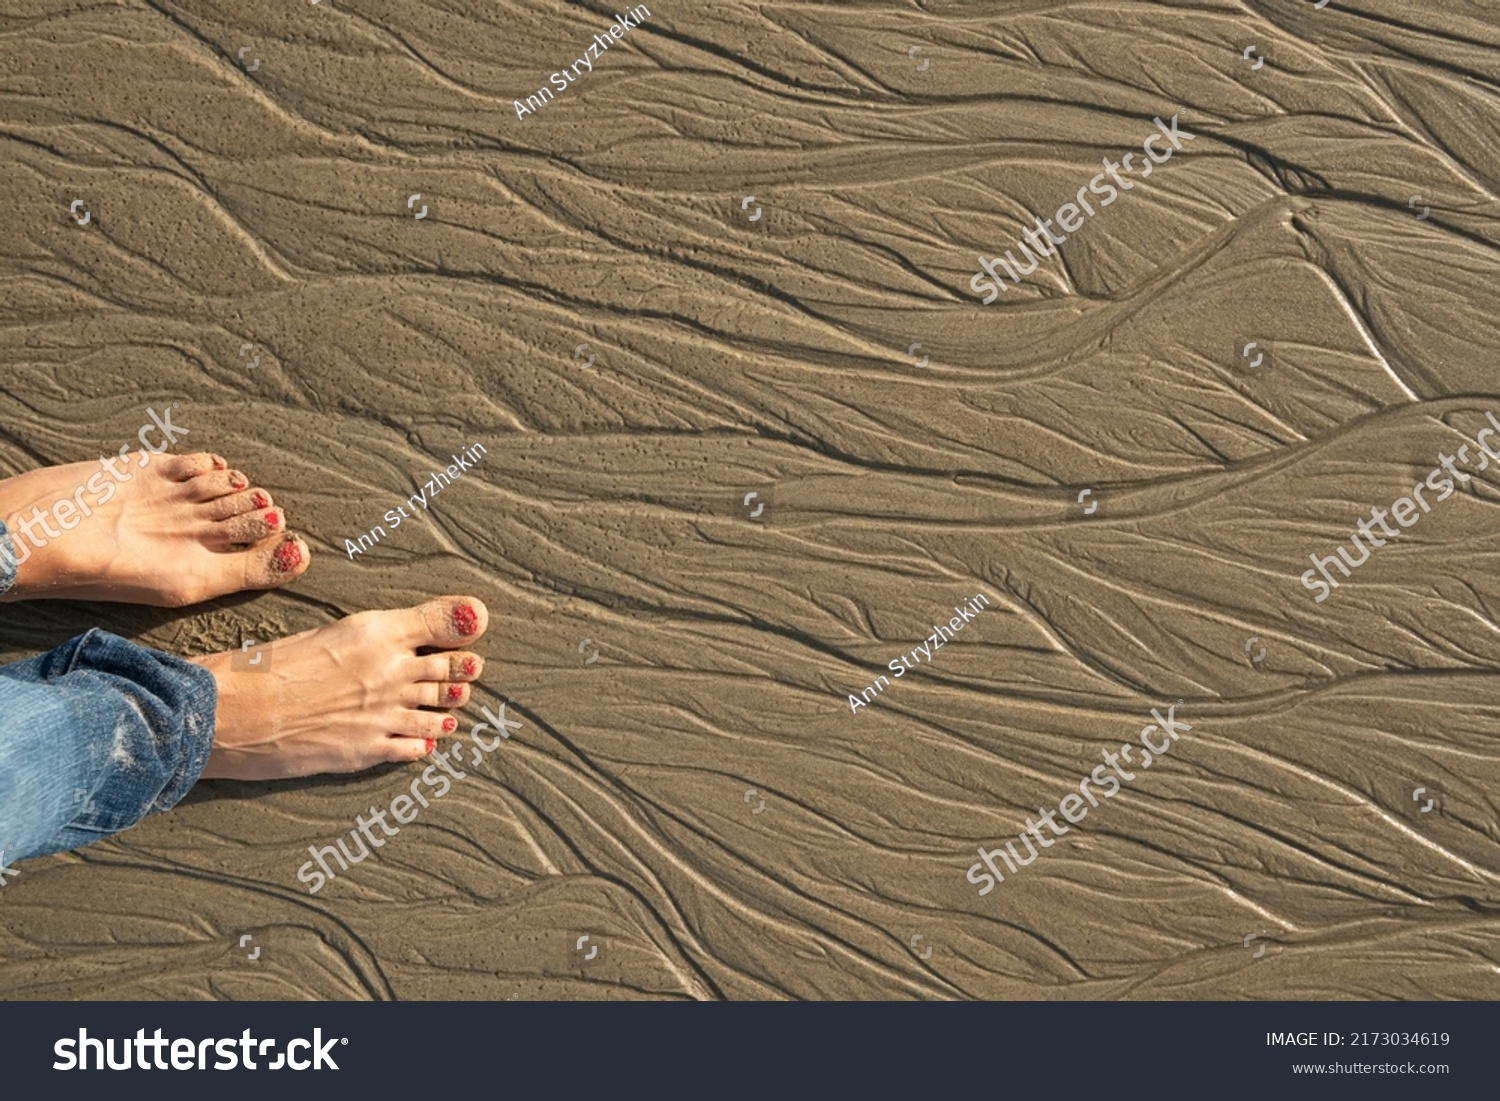 Bare feet in the sand on the beach sand. Patterns on the sand from the water at low tide. #2173034619